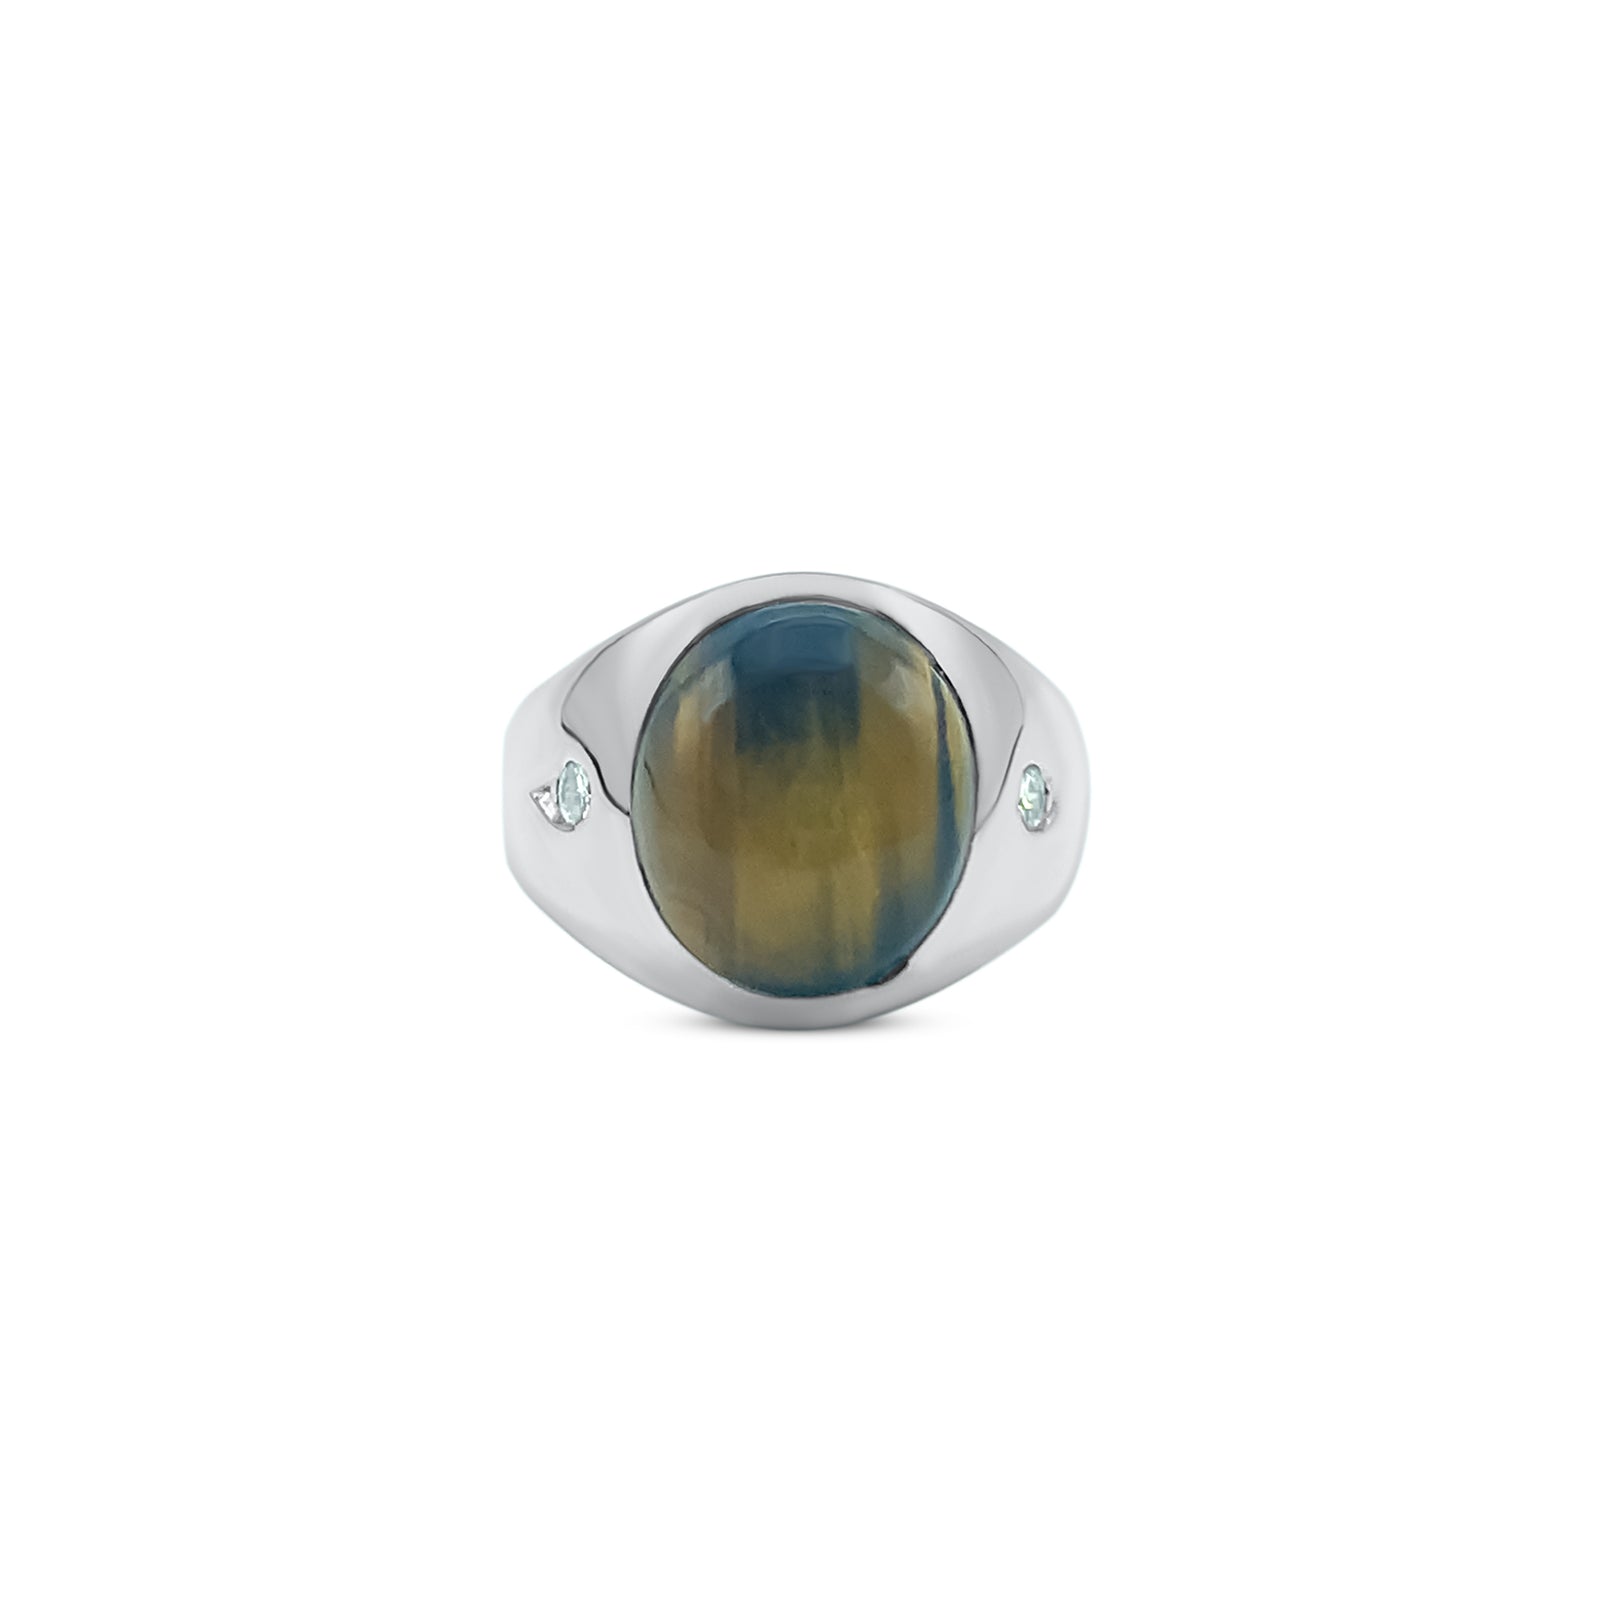 Buy Heavy Weight Men's Signet Style Ring Chrysoberyl Cats Eye Gemstone  2.23cts Online in India - Etsy